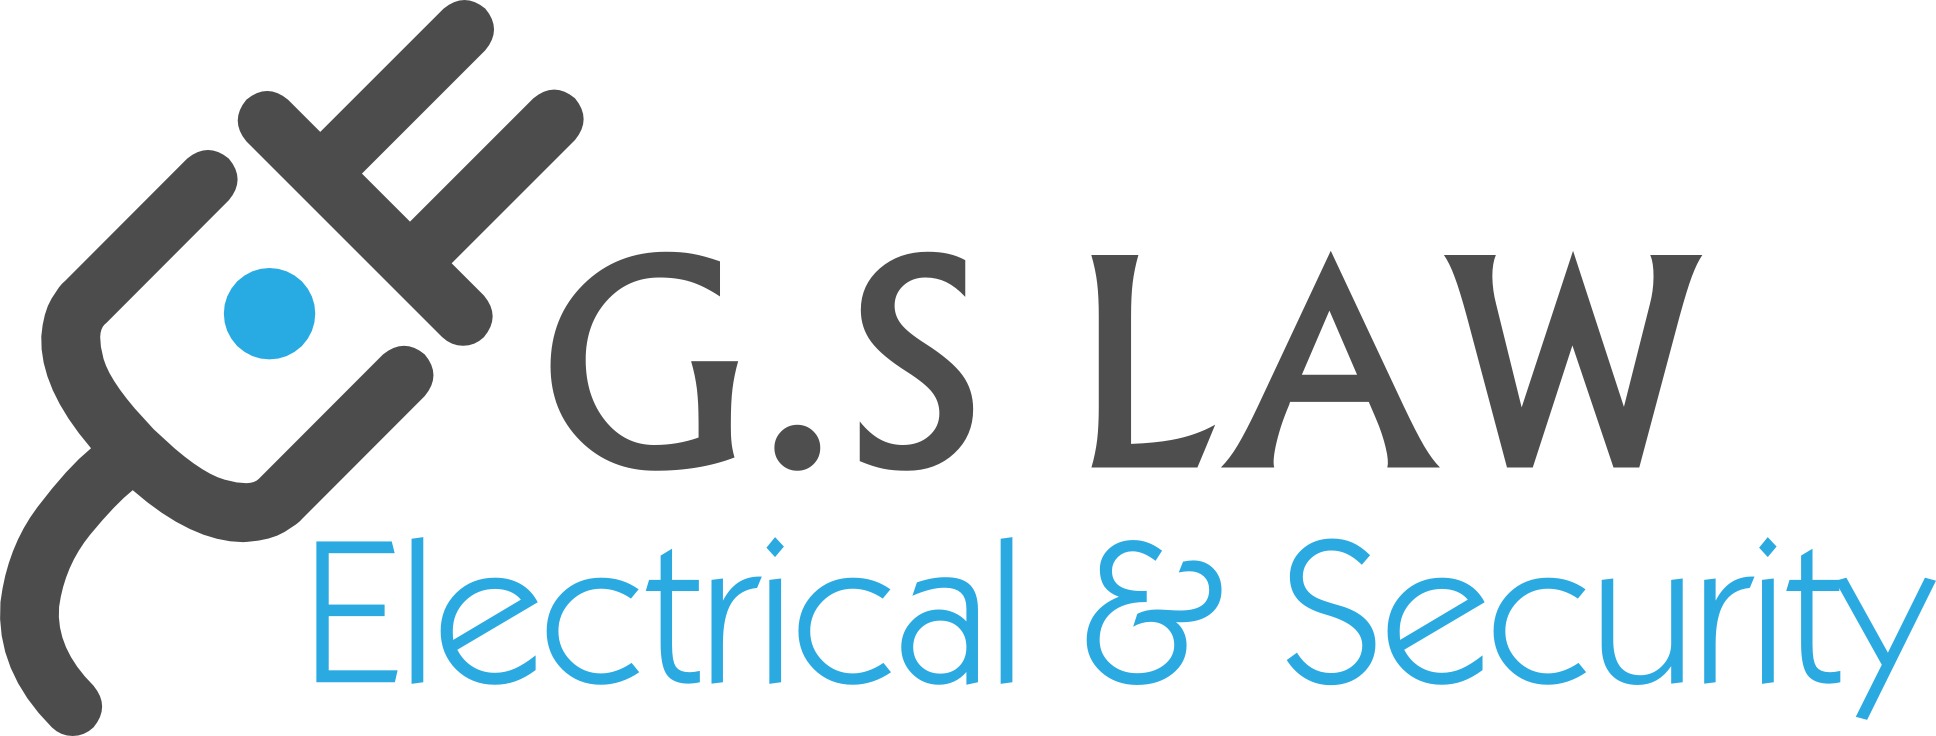 G.S Law Electrical & Security